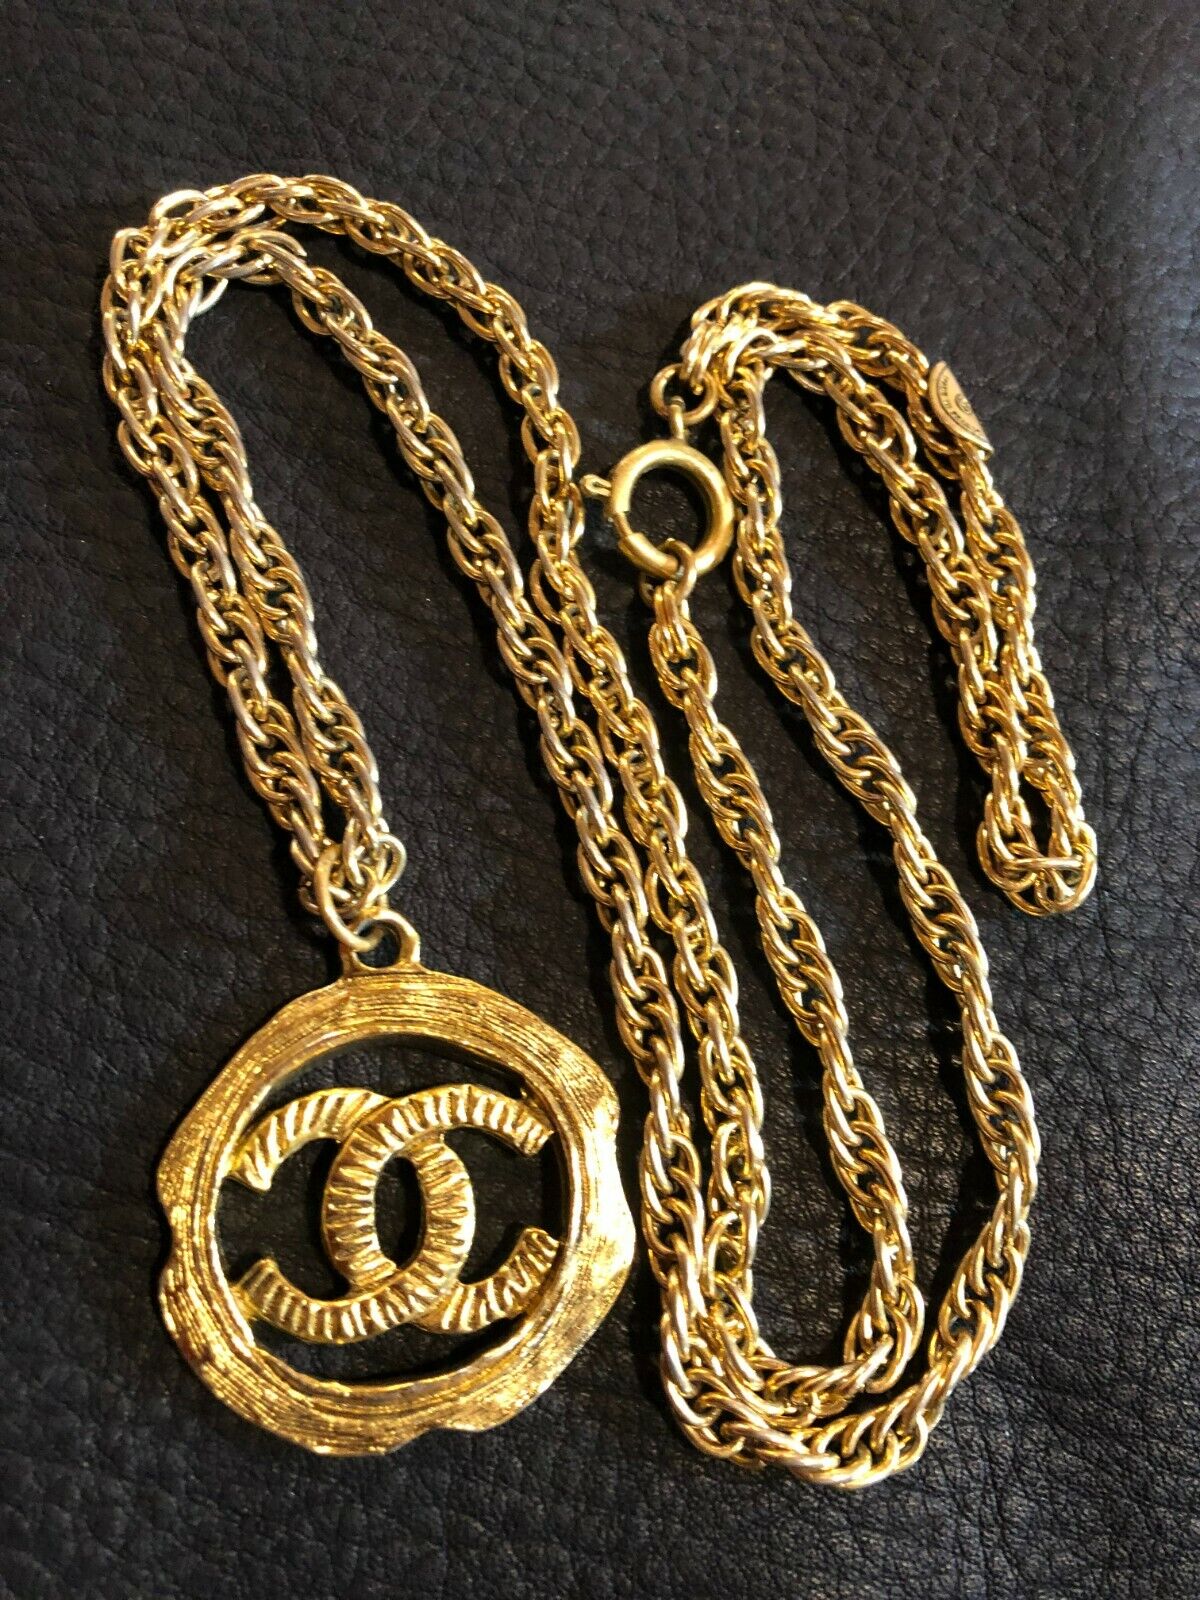 CHANEL Necklace Chain AUTH Coco Vintage Rare CC Mark Medal Gold